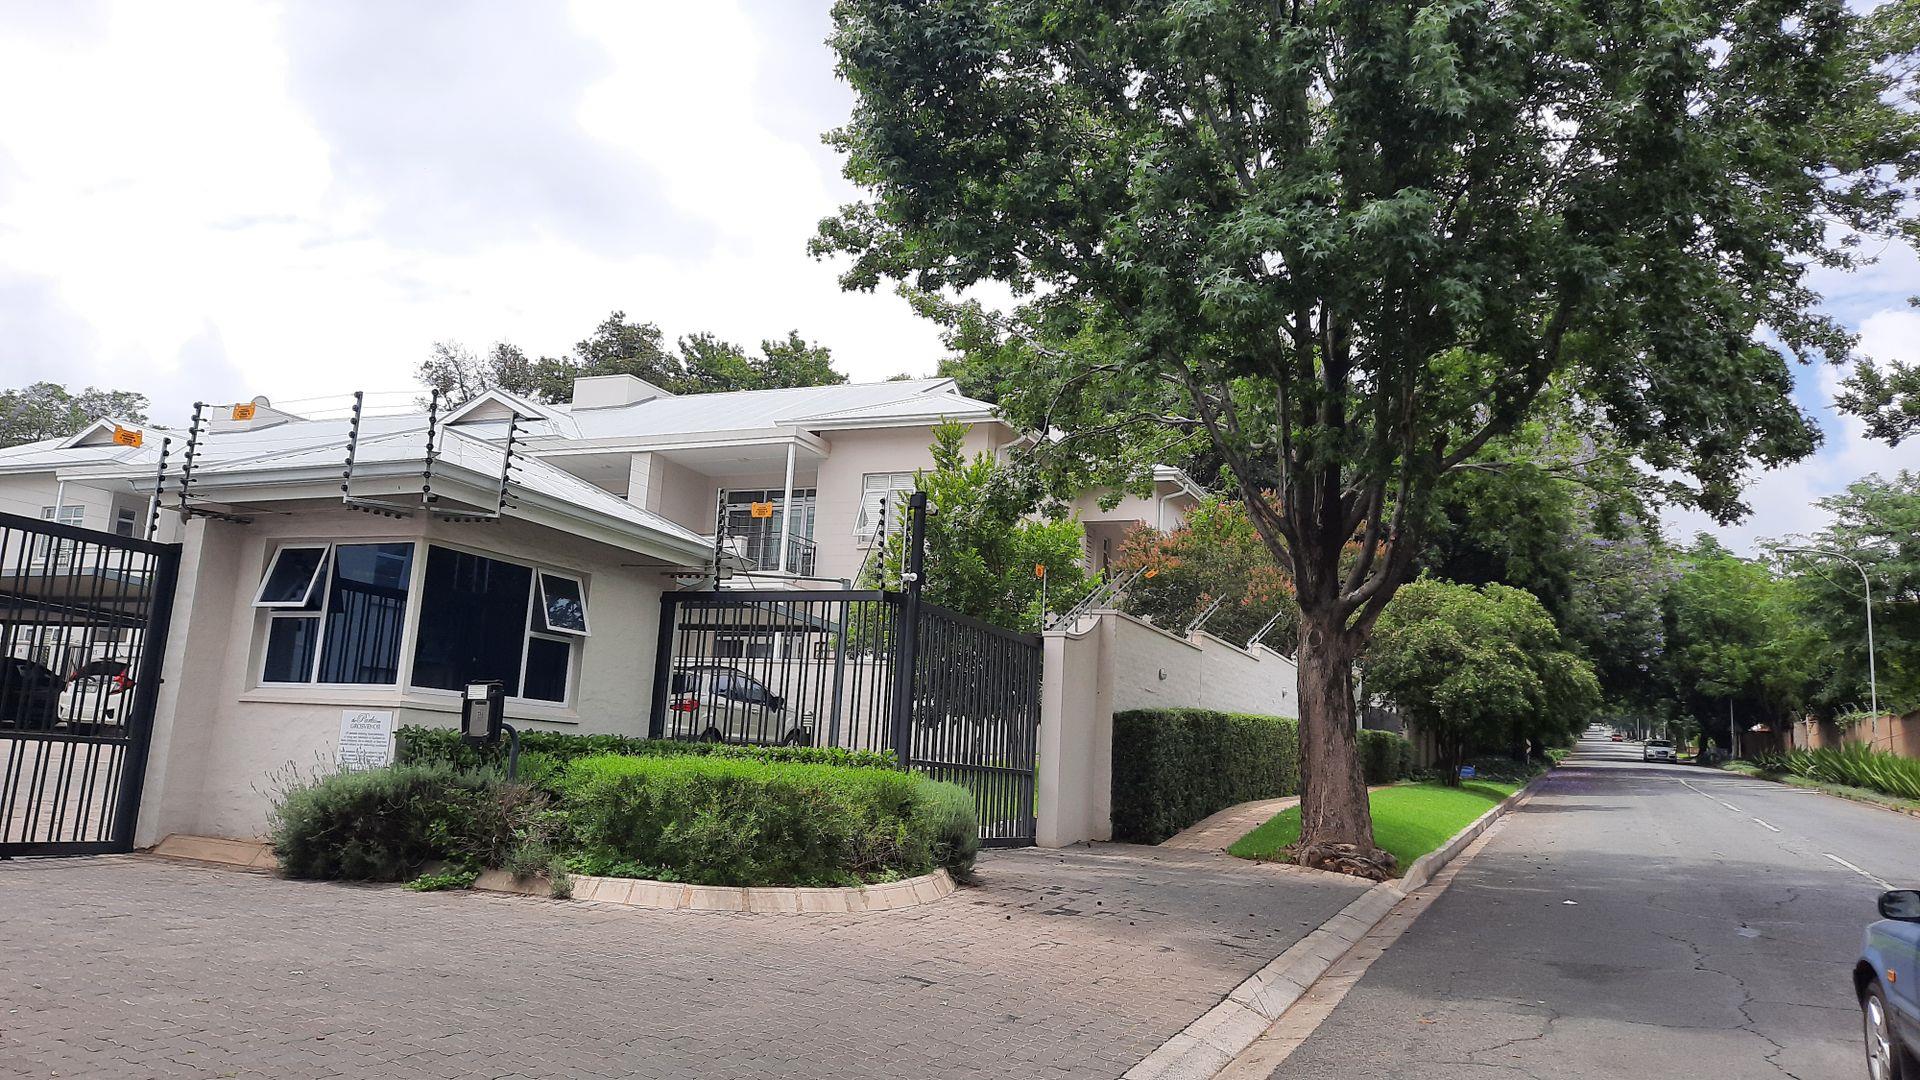 2 Bedroom Apartment / flat to rent in Craighall Park - 9 Lancaster Ave